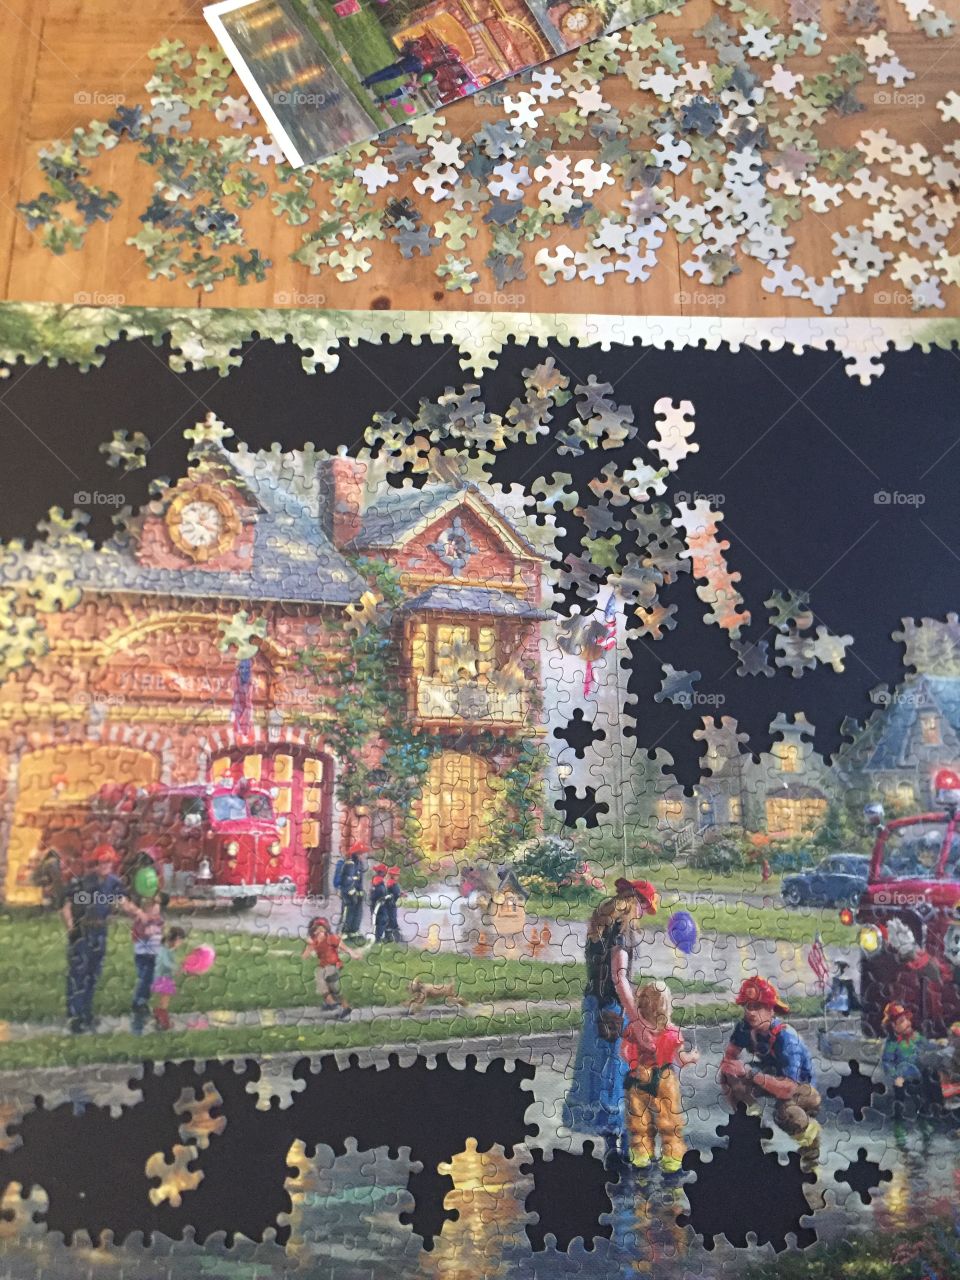 Puzzles Is one of my favourite winter activities on a cold winter day you can Pass the time putting together 1000 piece puzzle.When I have a completed we frame it and becomes wall art.